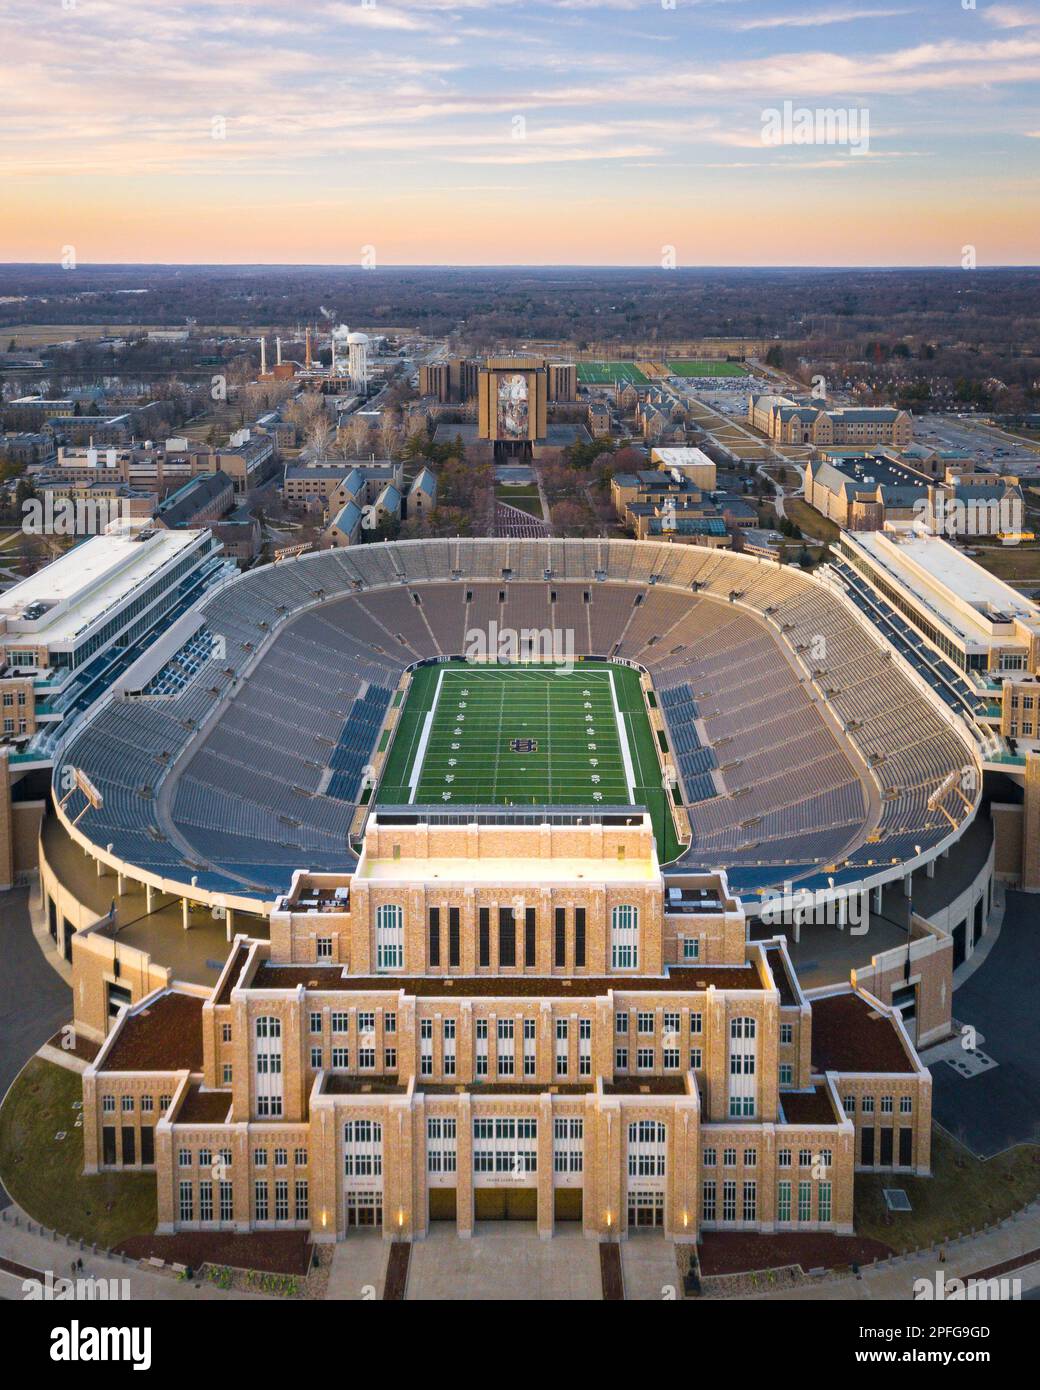 Famous Notre Dame Stadium at Sunset on Beautiful Day in South Bend, Indiana Stock Photo